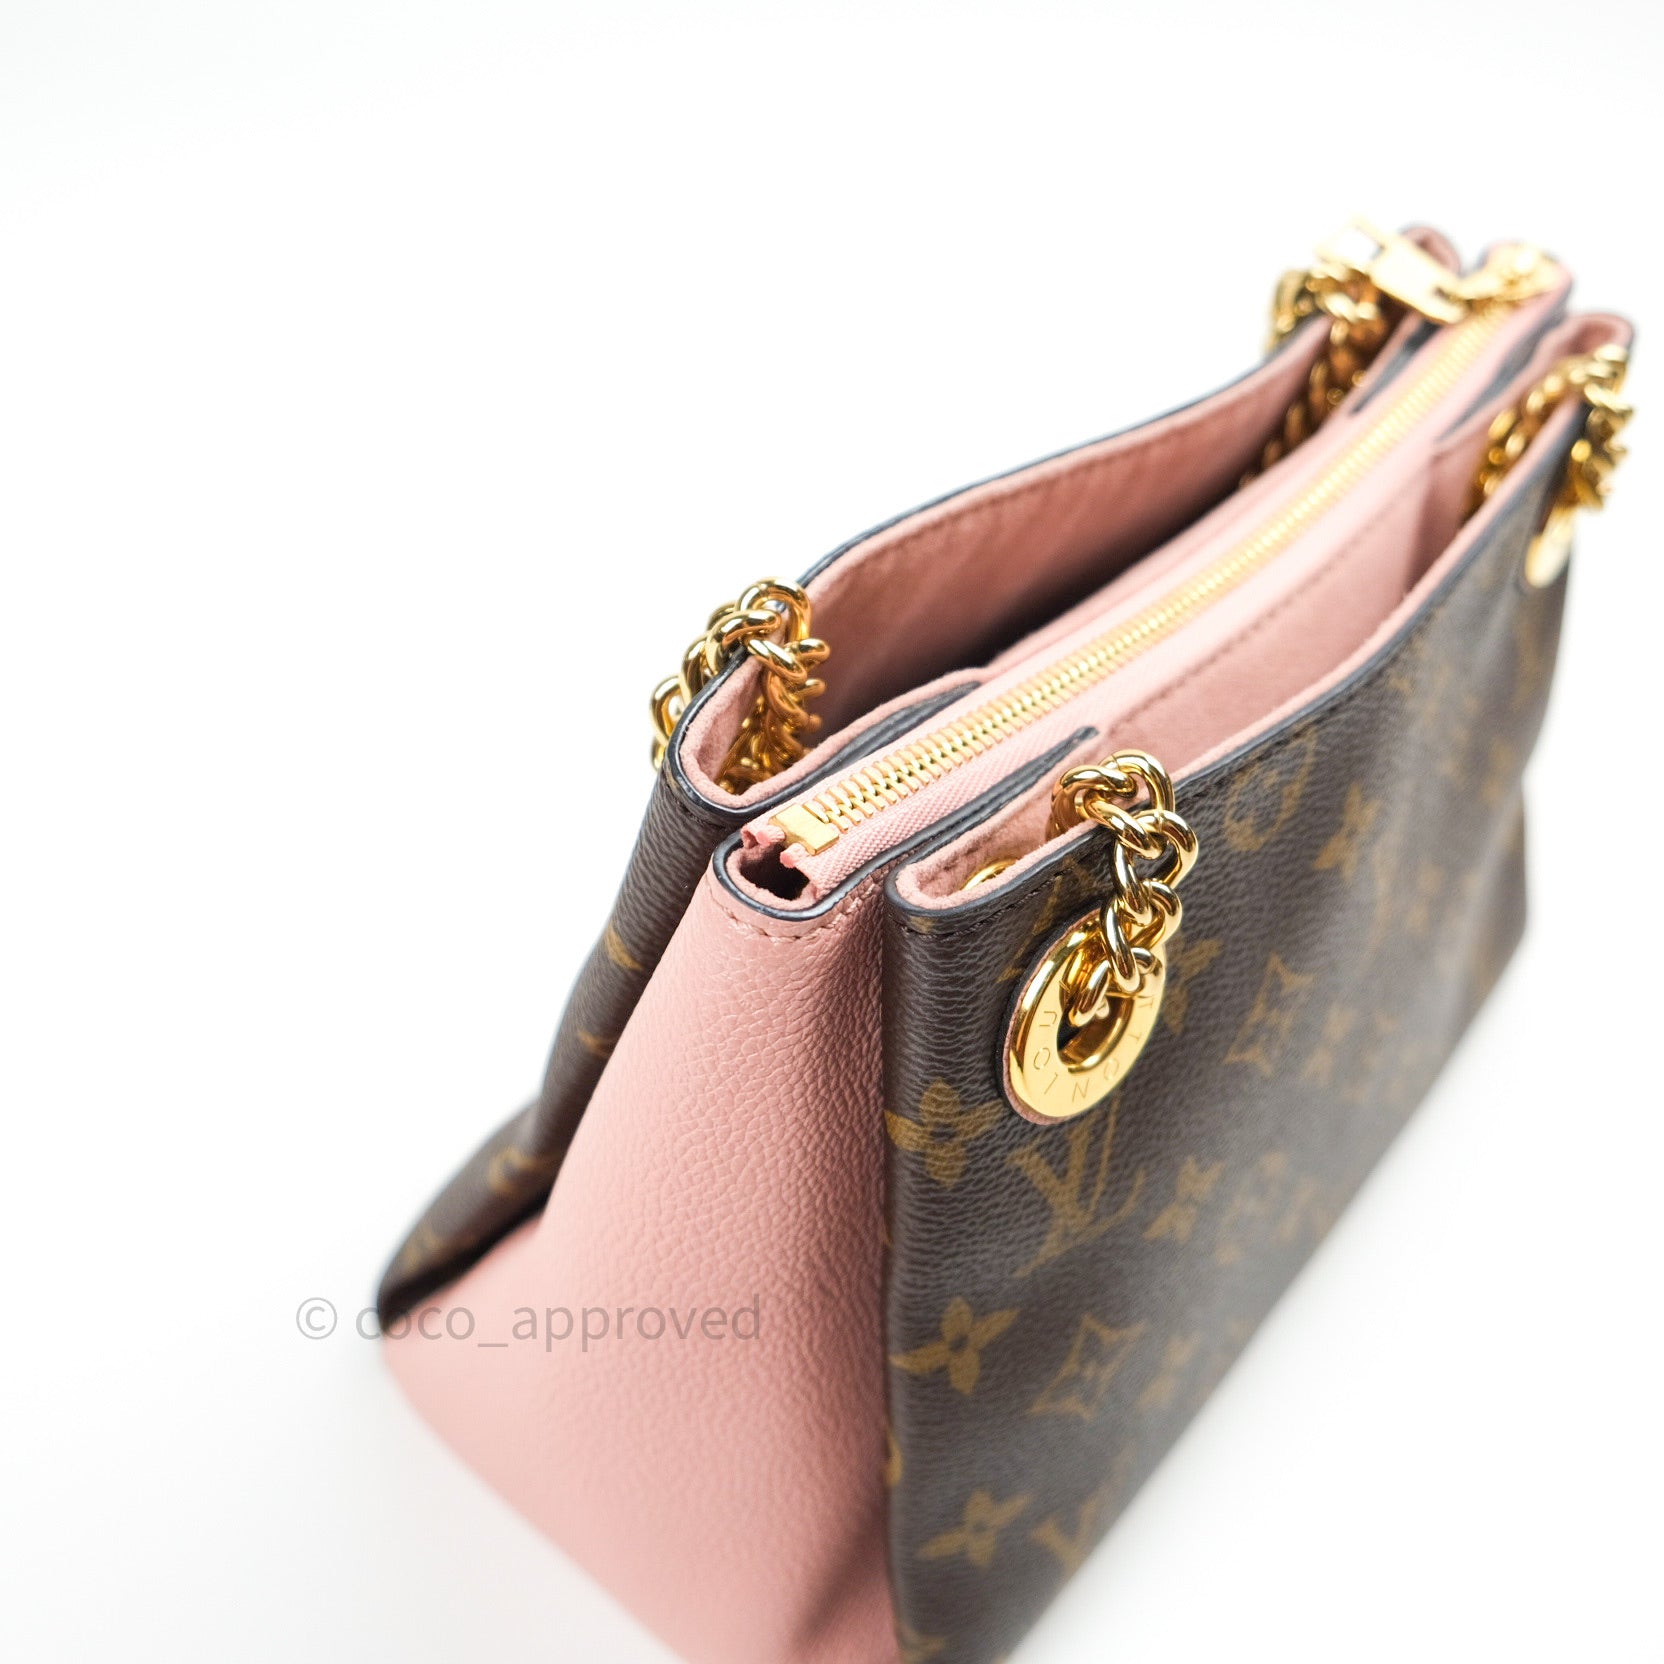 LV Surene BB in Monogram Canvas and Rose Poudre leather